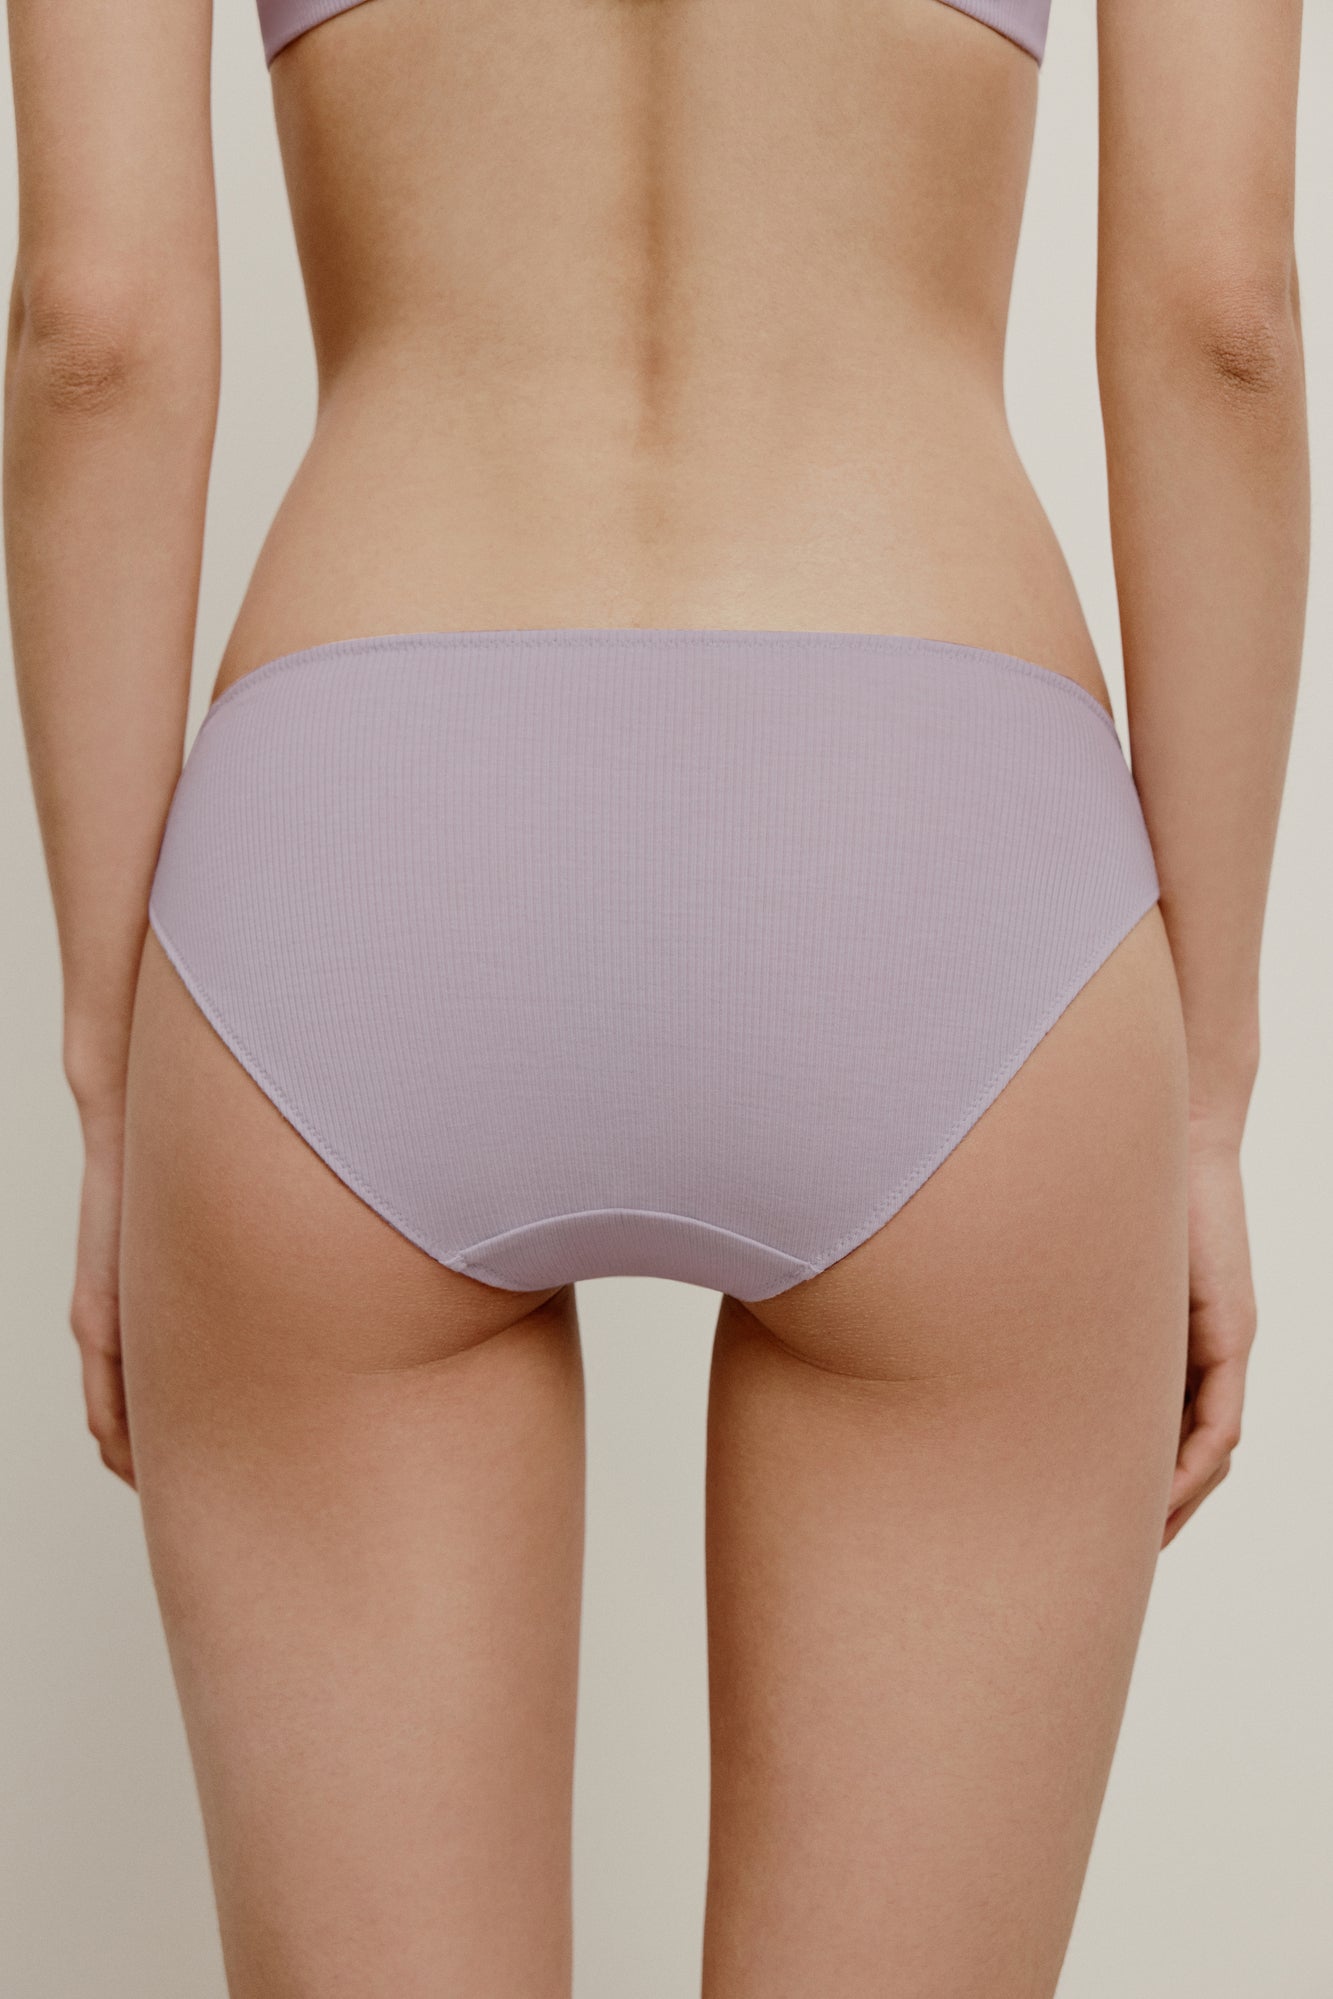 back of the purple low waist brief